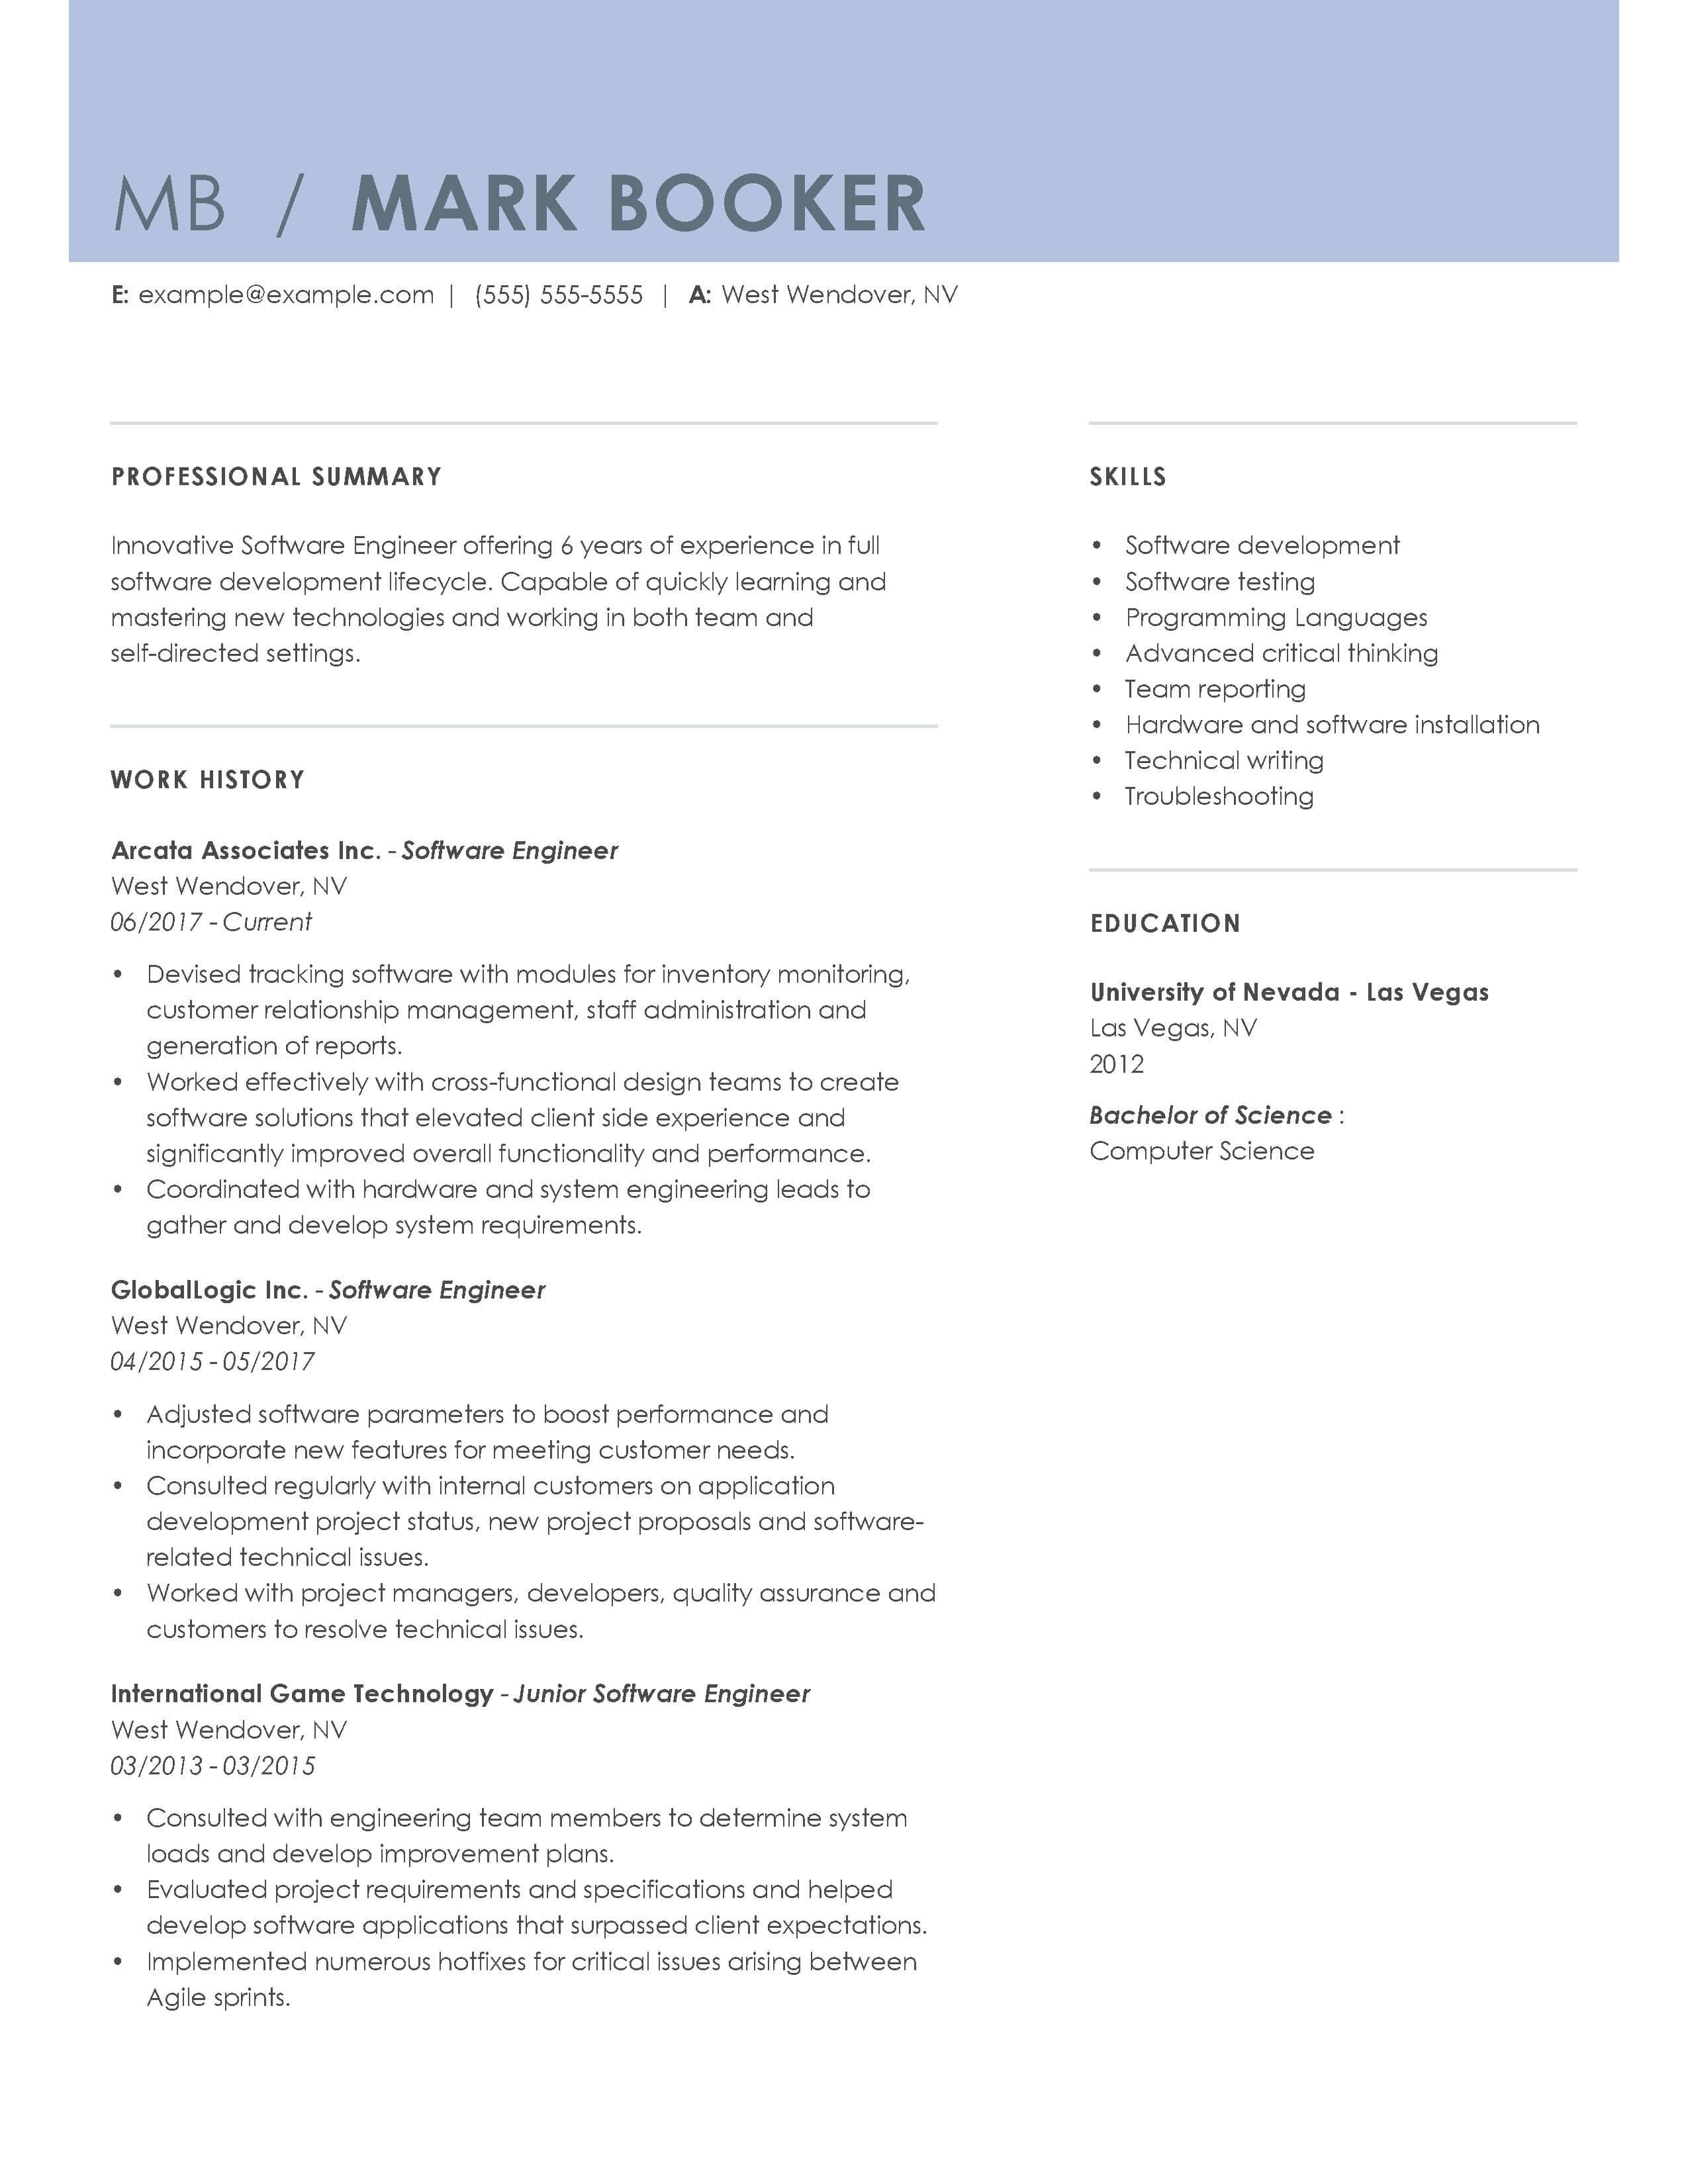 Basic Resume Examples  30 Resume Examples View Industry Job Title